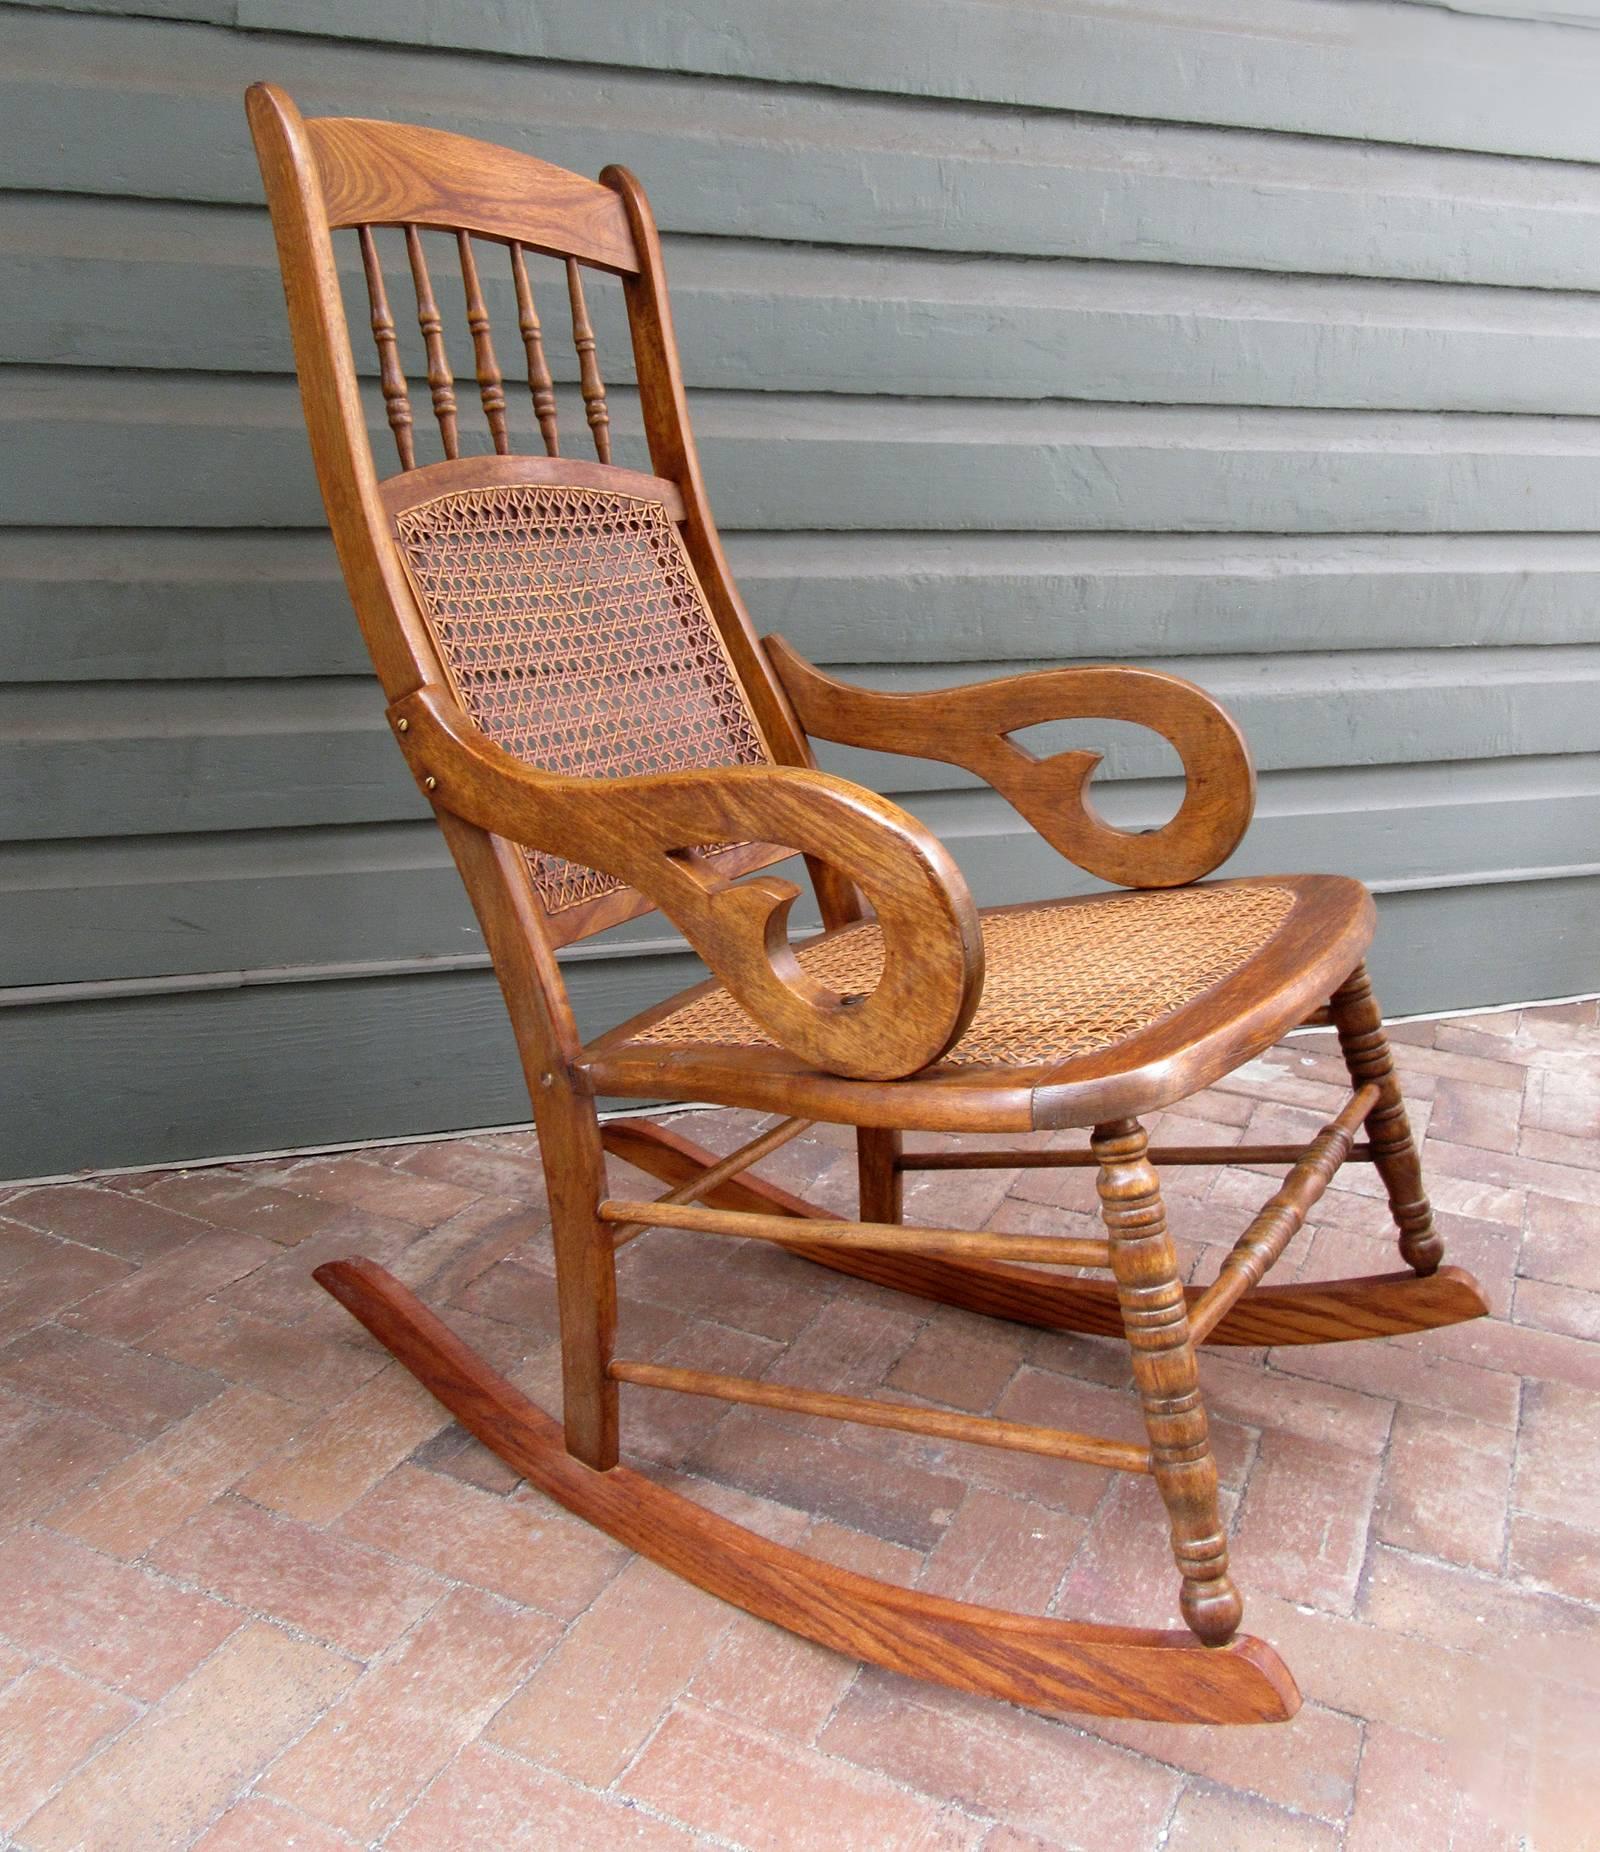 Virgin Islands Mid-19th Century St. Croix Regency Mahogany and Cane Rocking Chair